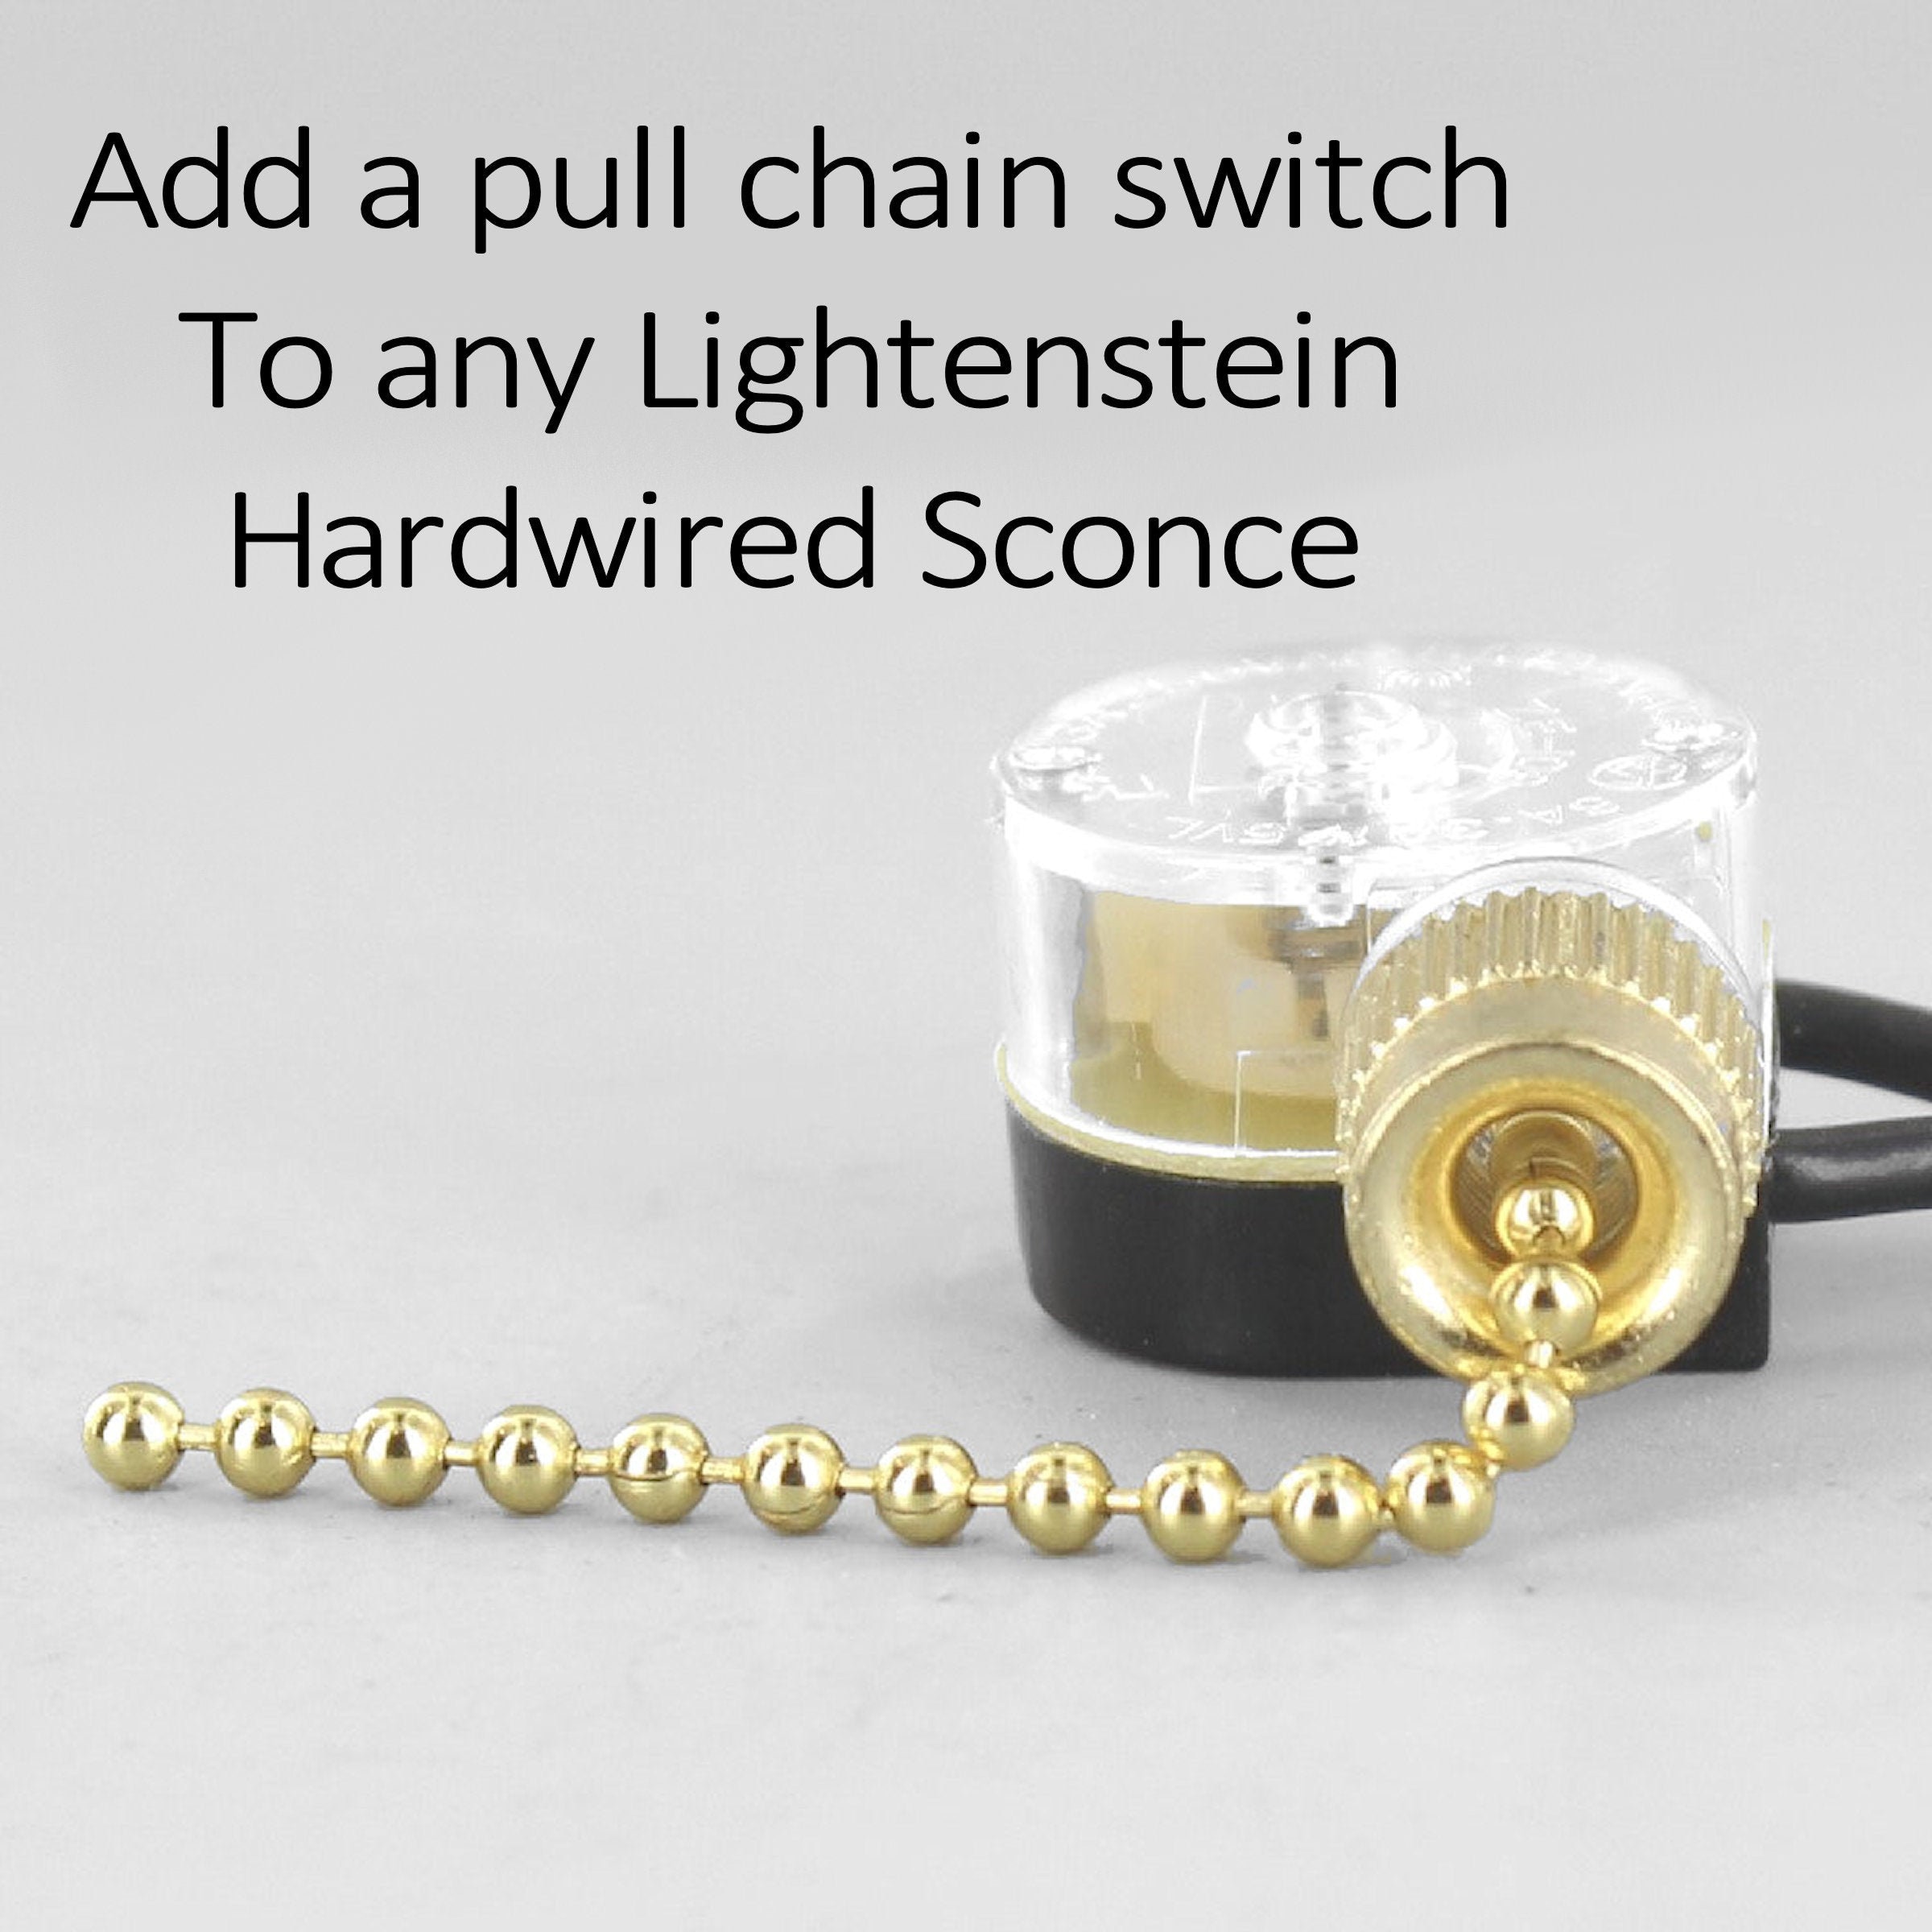 Add a Pull Chain Switch to Any Hardwired Sconces Sold by Lightenstein 